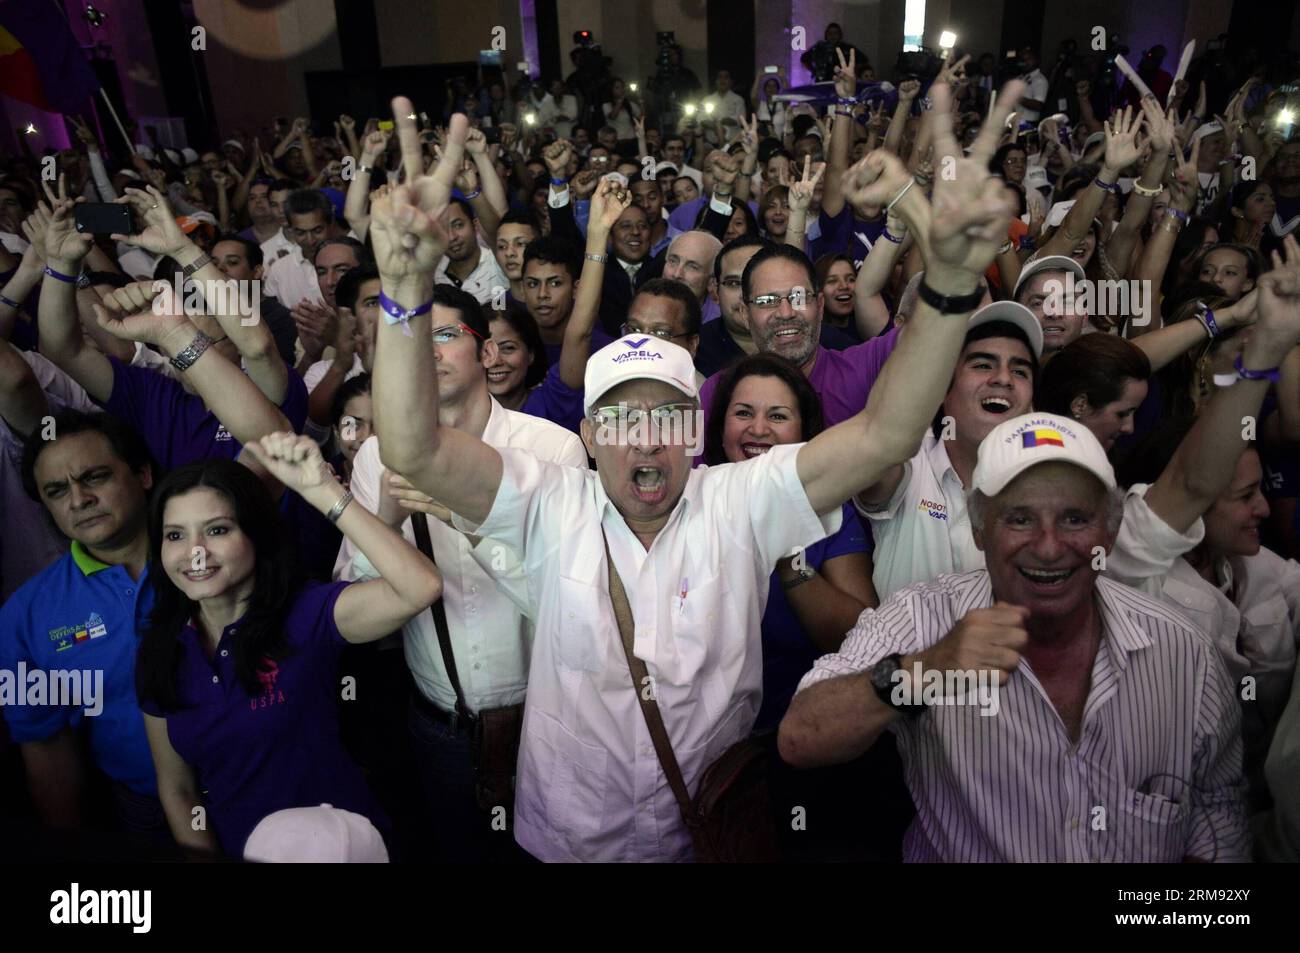 PANAMA CITY, May 4, 2014 (Xinhua) -- Supporters of presidential candidate Juan Carlos Varela from the Panamenista Party react after the preliminary results of the general elections, in Panama City, capital of Panama, on May 4, 2014. President of the Supreme Electoral Court Erasmo Pinilla said on Sunday night that Juan Carlos Varela is the virtual winner of Panama s presidency.(Xinhua/Mauricio Valenzuela) PANAMA-PANAMA CITY-POLITICS-ELECTIONS PUBLICATIONxNOTxINxCHN   Panama City May 4 2014 XINHUA Supporters of Presidential Candidate Juan Carlos Varela from The  Party react After The preliminary Stock Photo